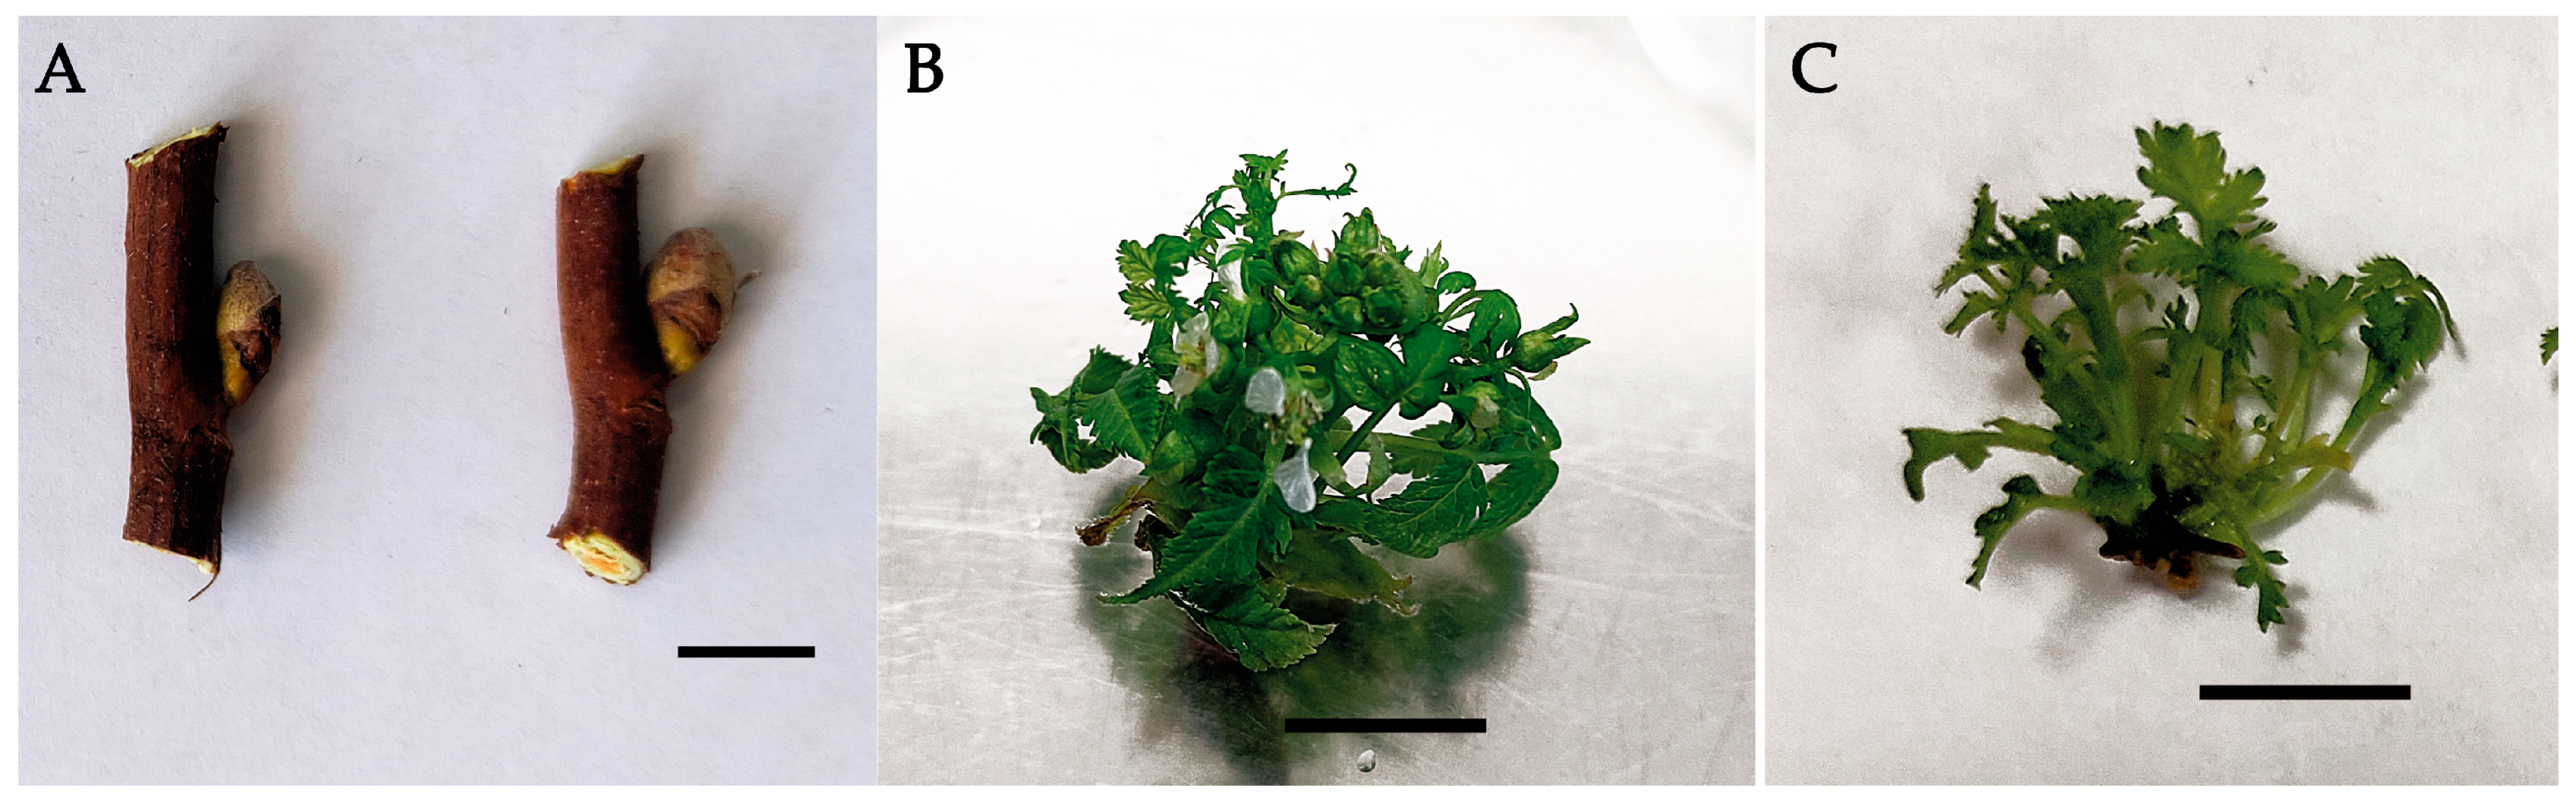 Life | Free Full-Text | Investigation of Phenolic Compounds and Antioxidant  Activity of Sorbaria pallasii (Rosaceae) Microshoots Grown In Vitro